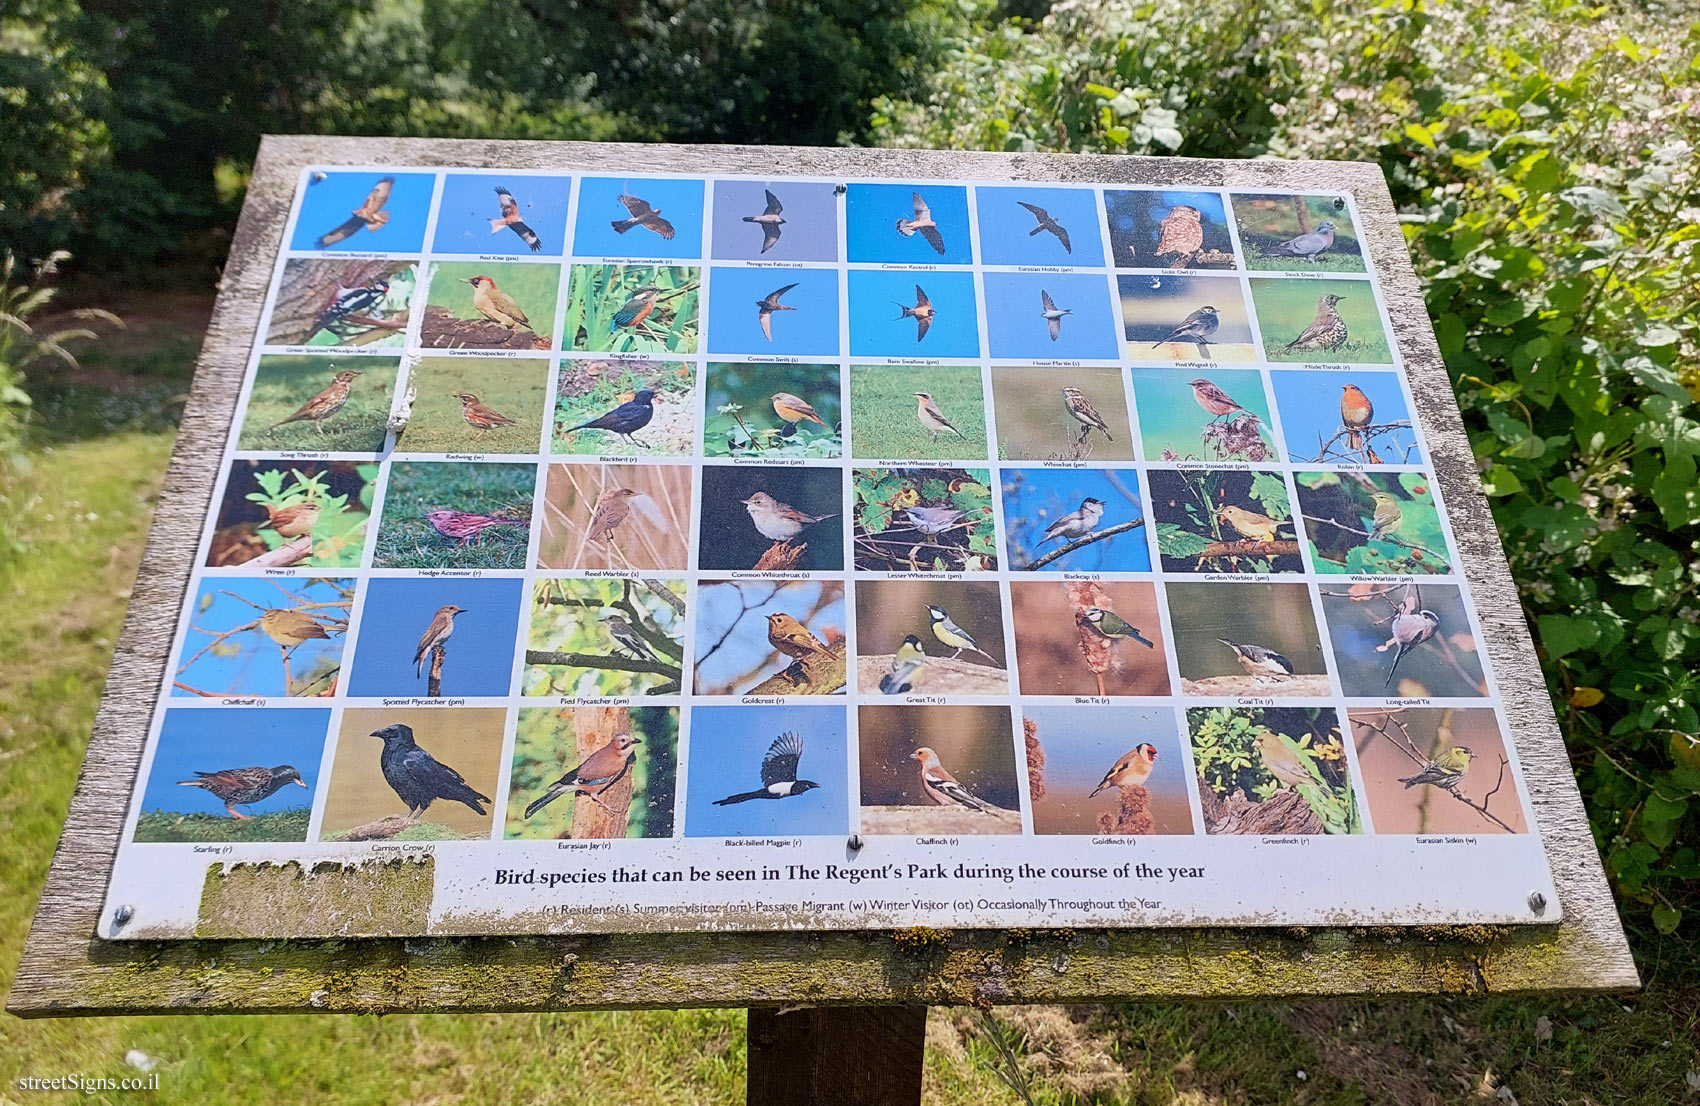 London - Regent’s Park - types of birds that can be seen in the park throughout the year